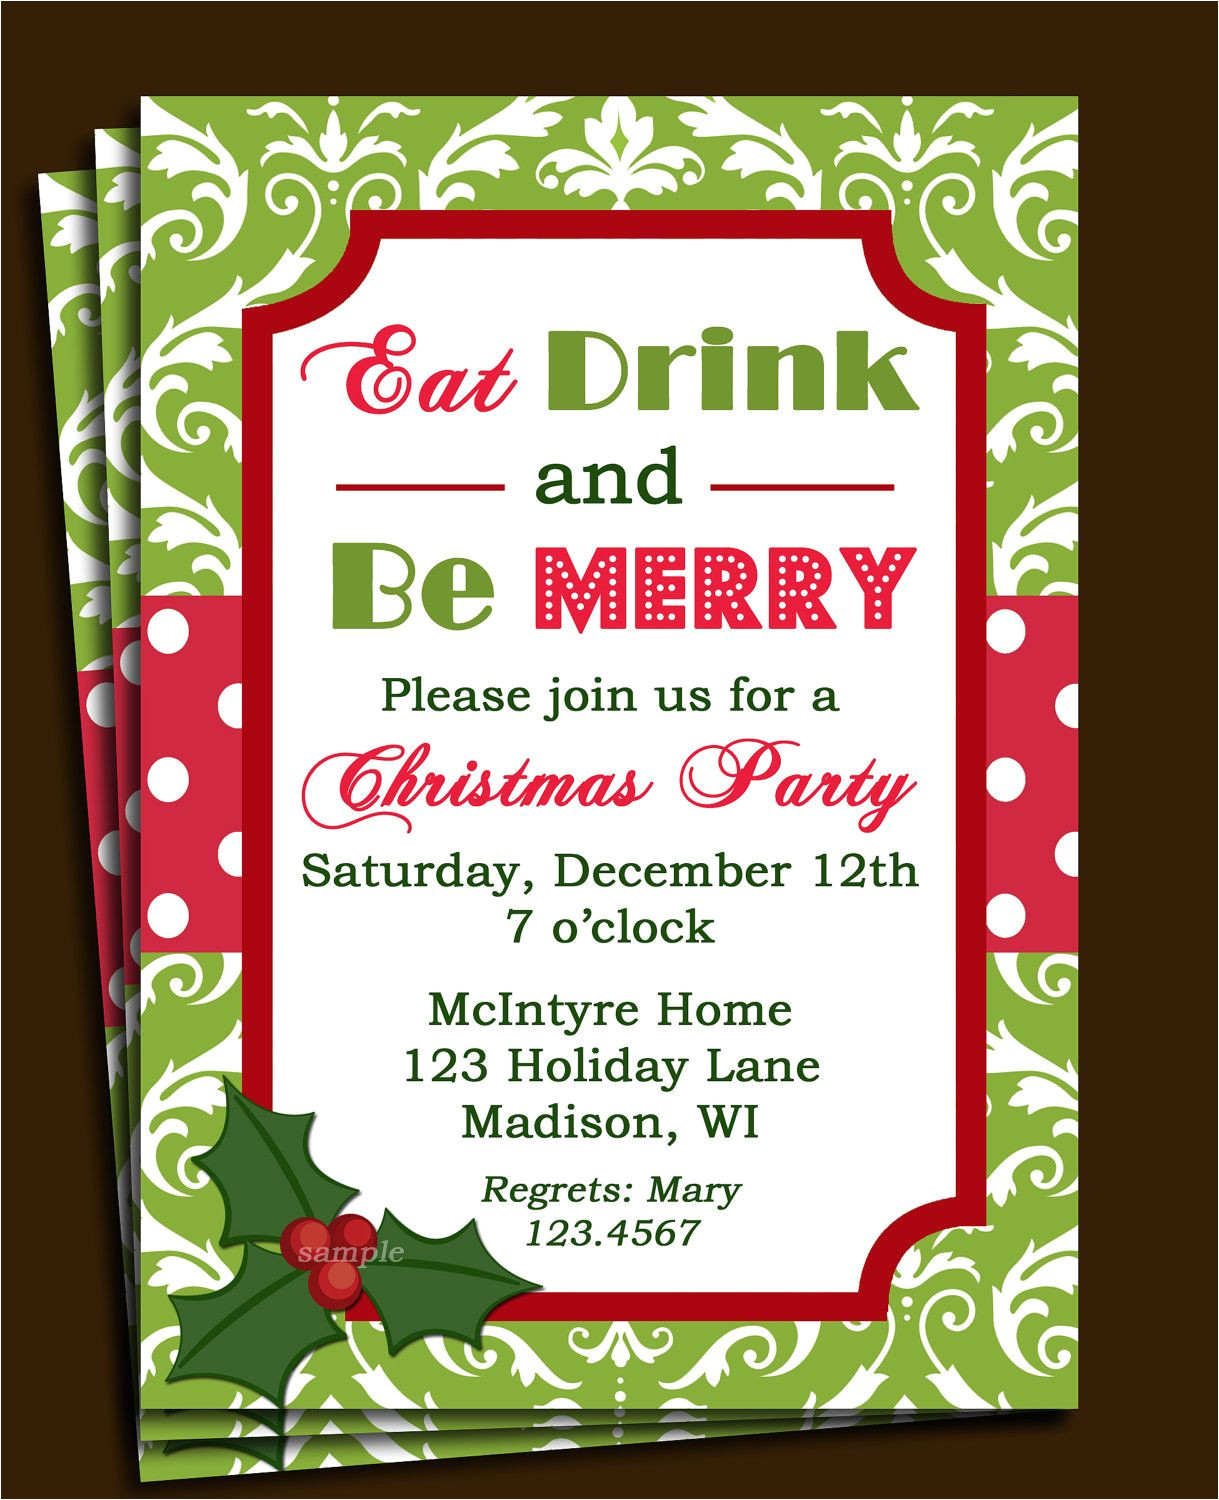 Template for Christmas Party Invitation In Office Free Printable Office Christmas Party Invitations